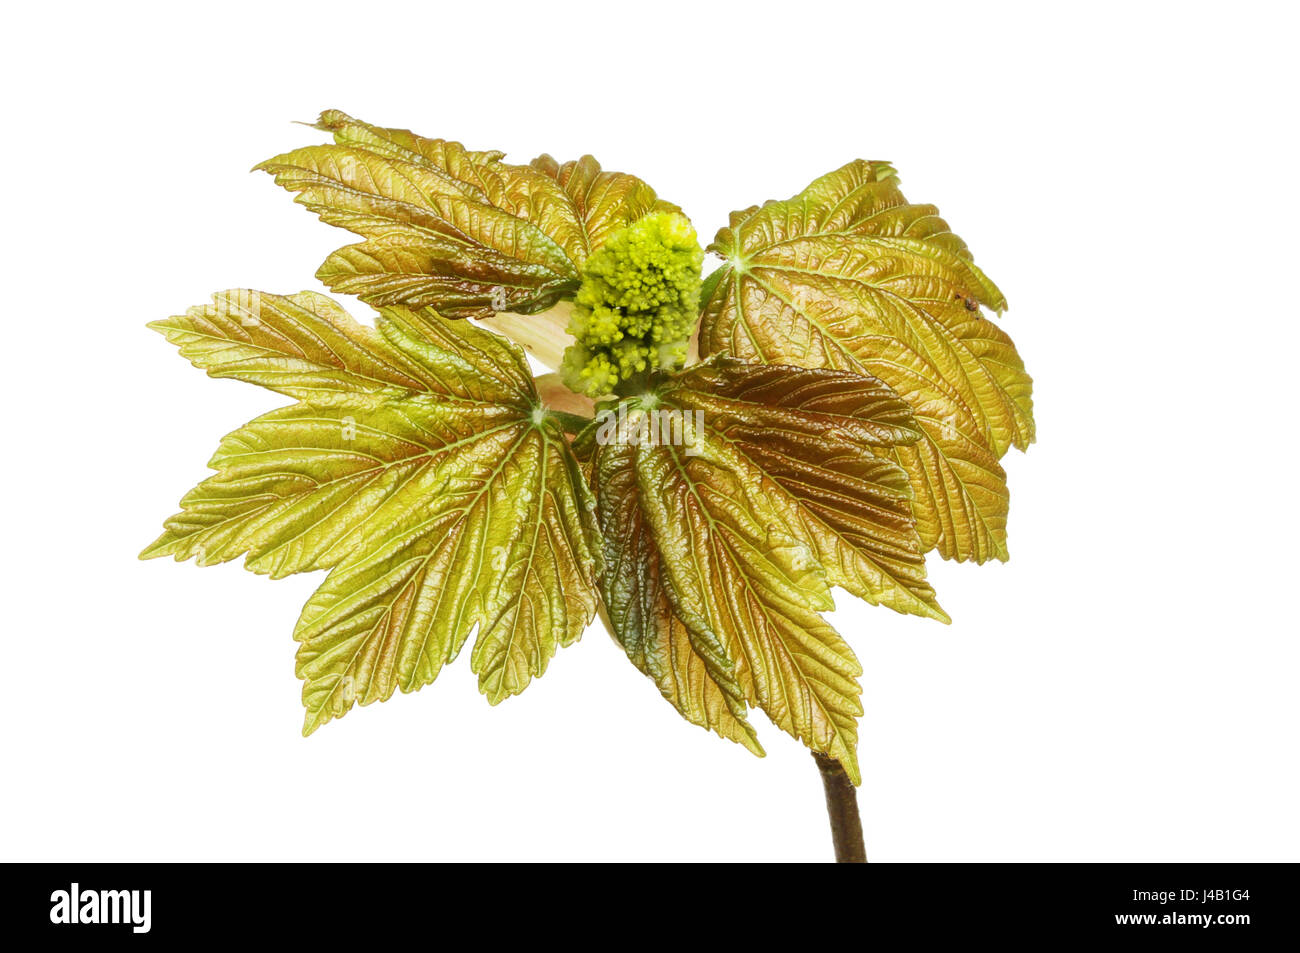 Fresh copper colored Sycamore leaves and flower bud isolated against white Stock Photo